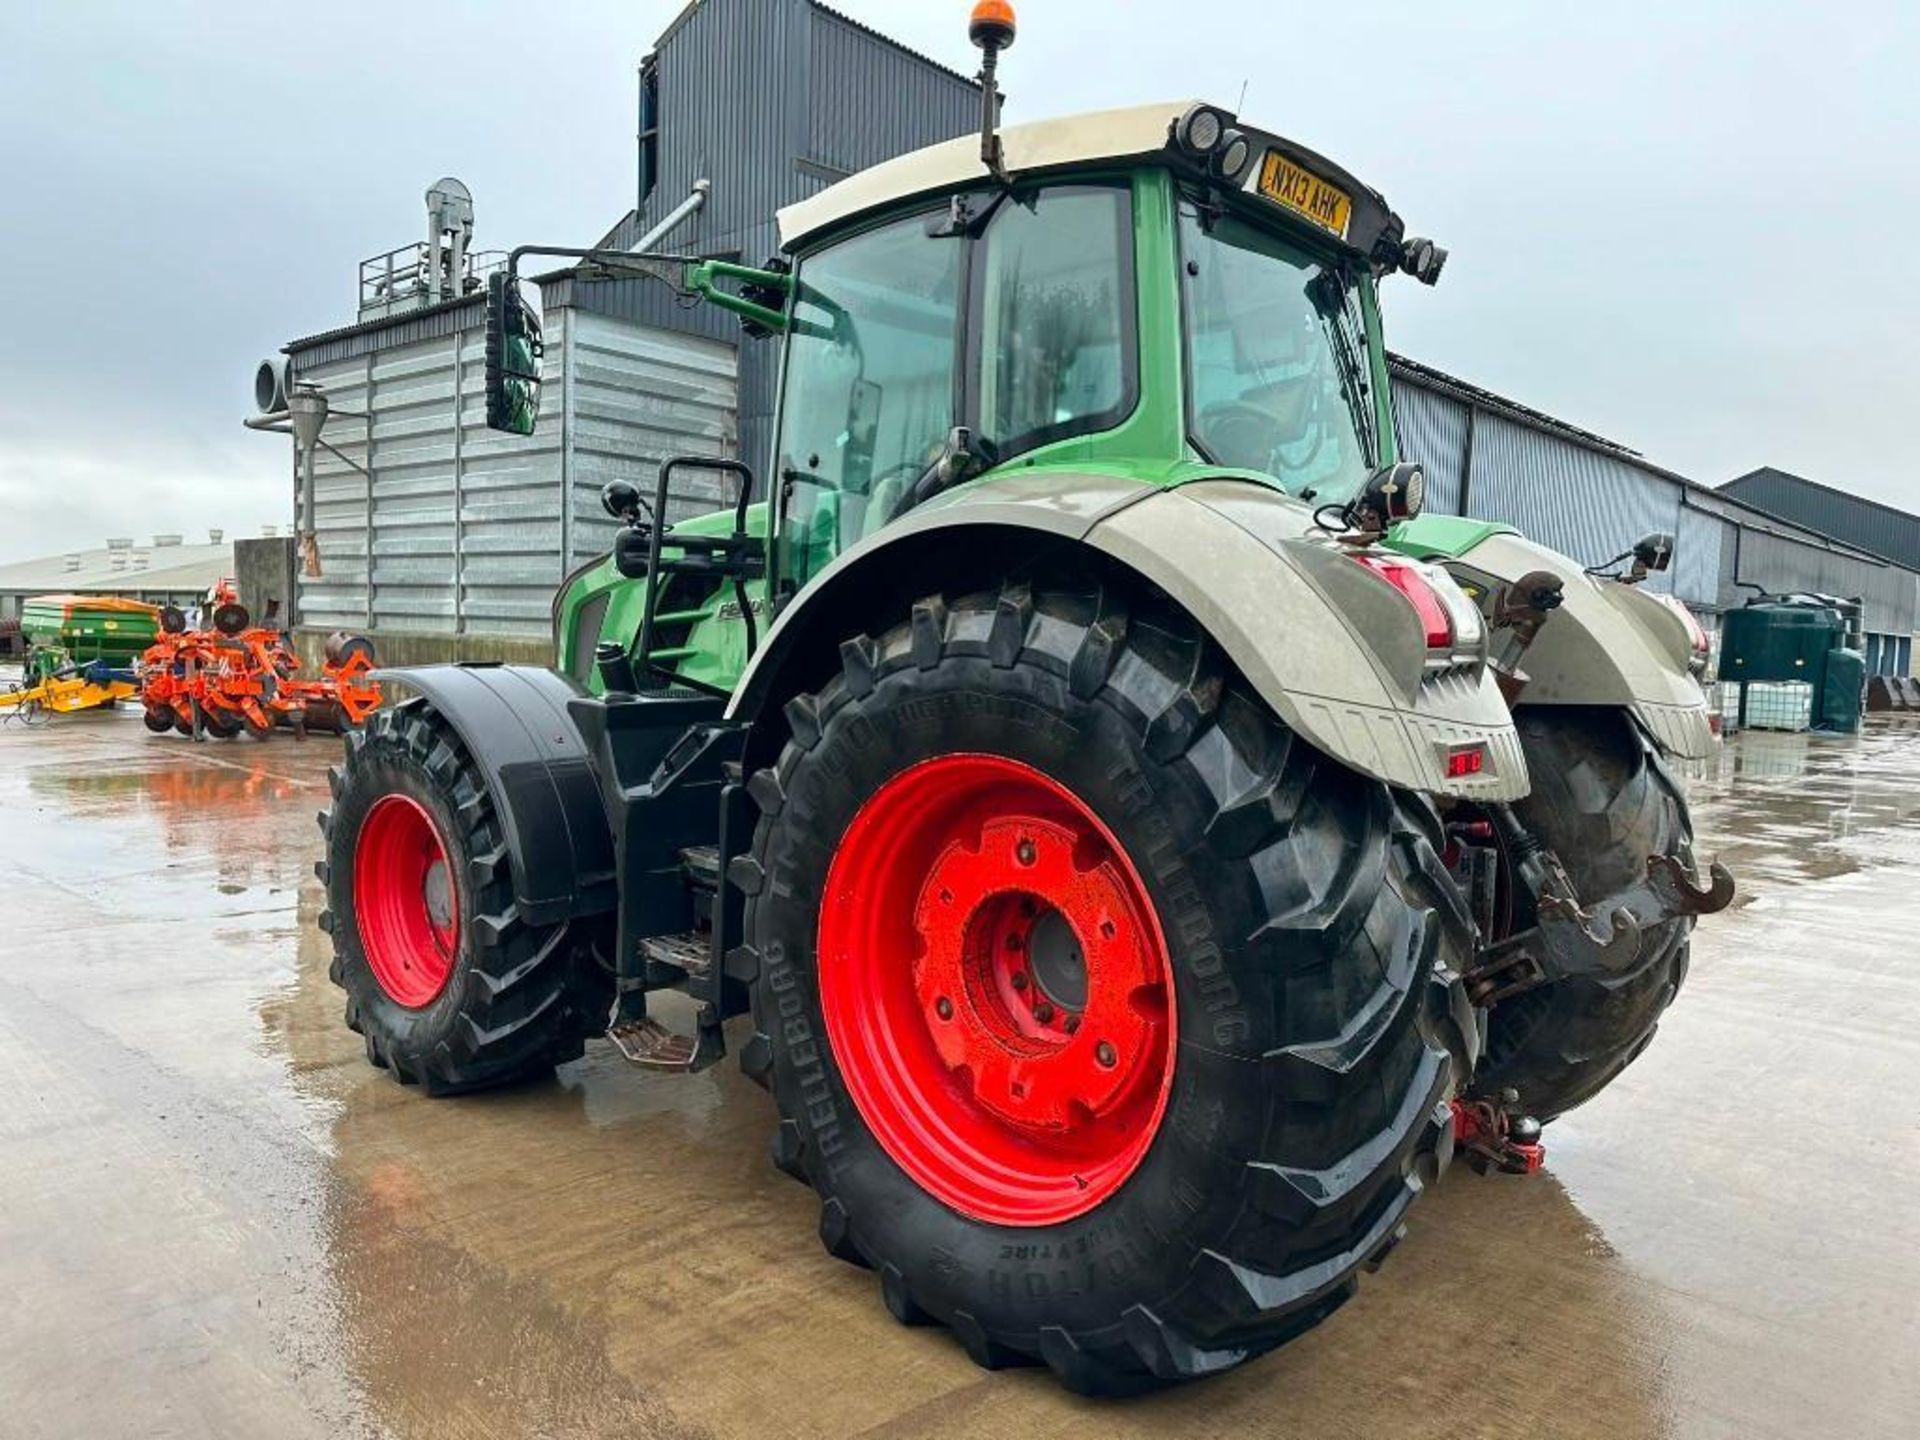 2013 Fendt 828 Vario tractor, 4wd, front linkage, front spool valves, 4No rear spool valves, Bill Be - Image 17 of 23